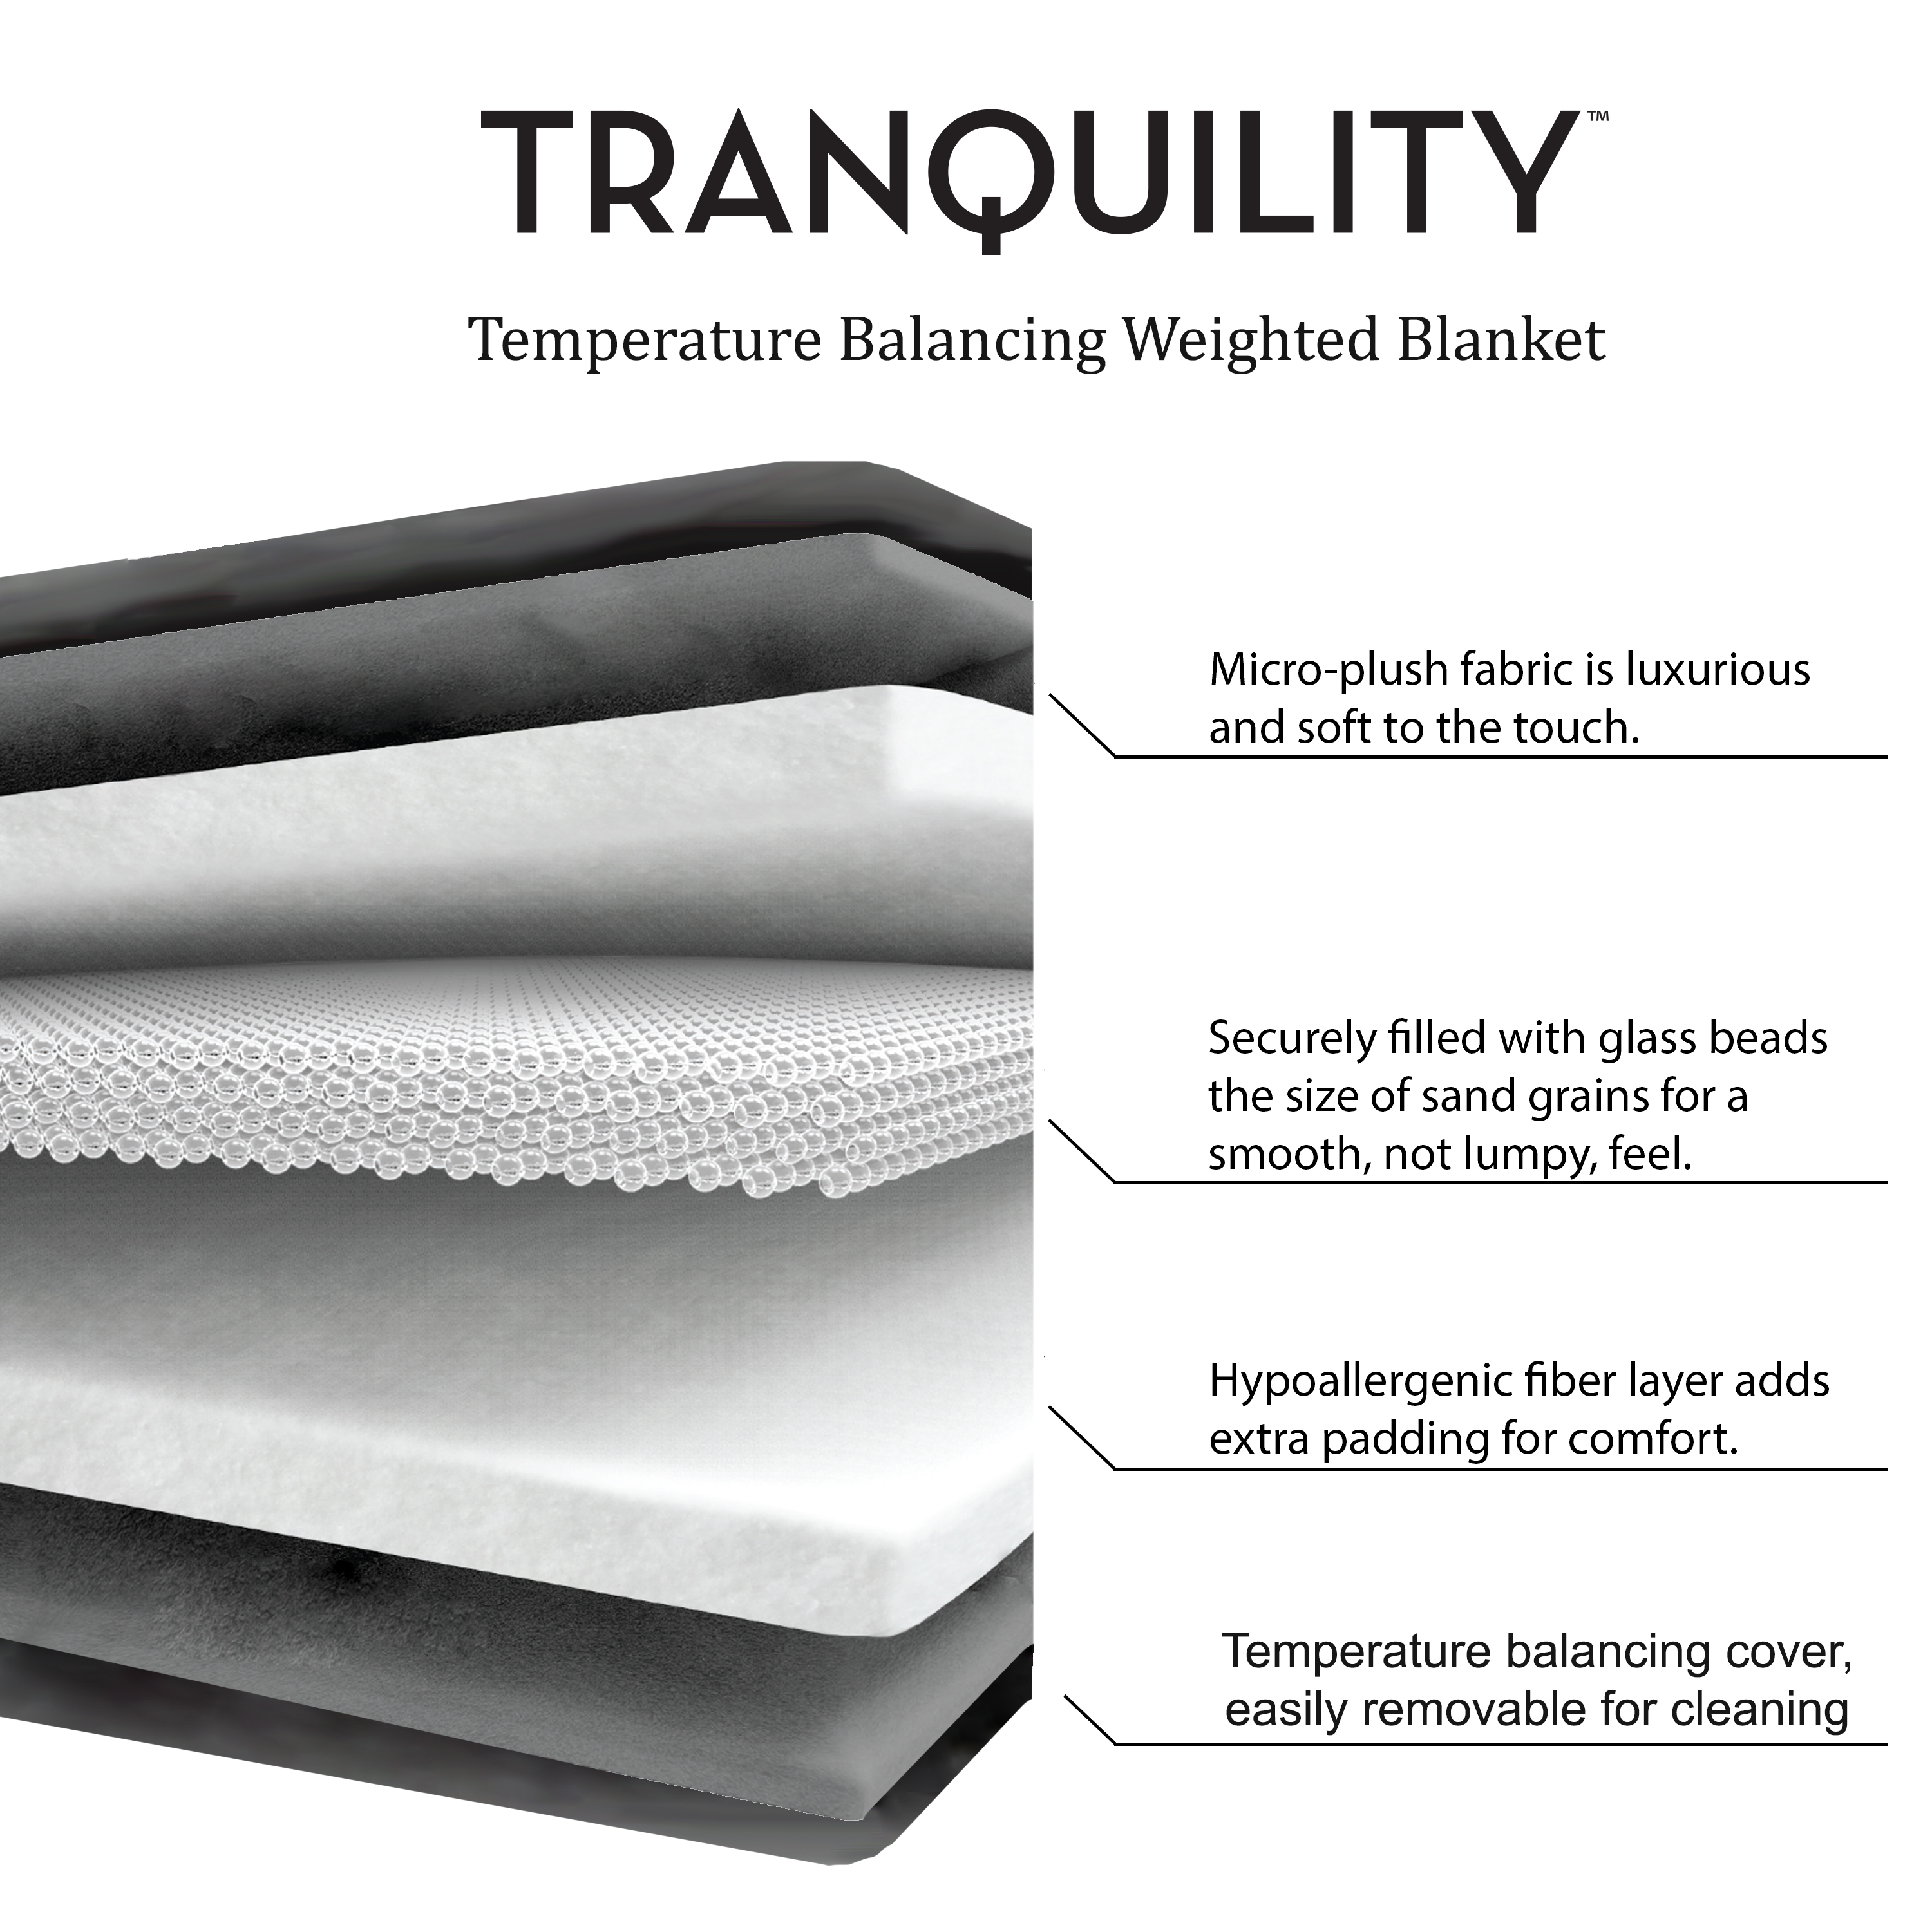 Tranquility Temperature Balancing Weighted Blanket with Washable Cover, 18 lbs - image 10 of 10